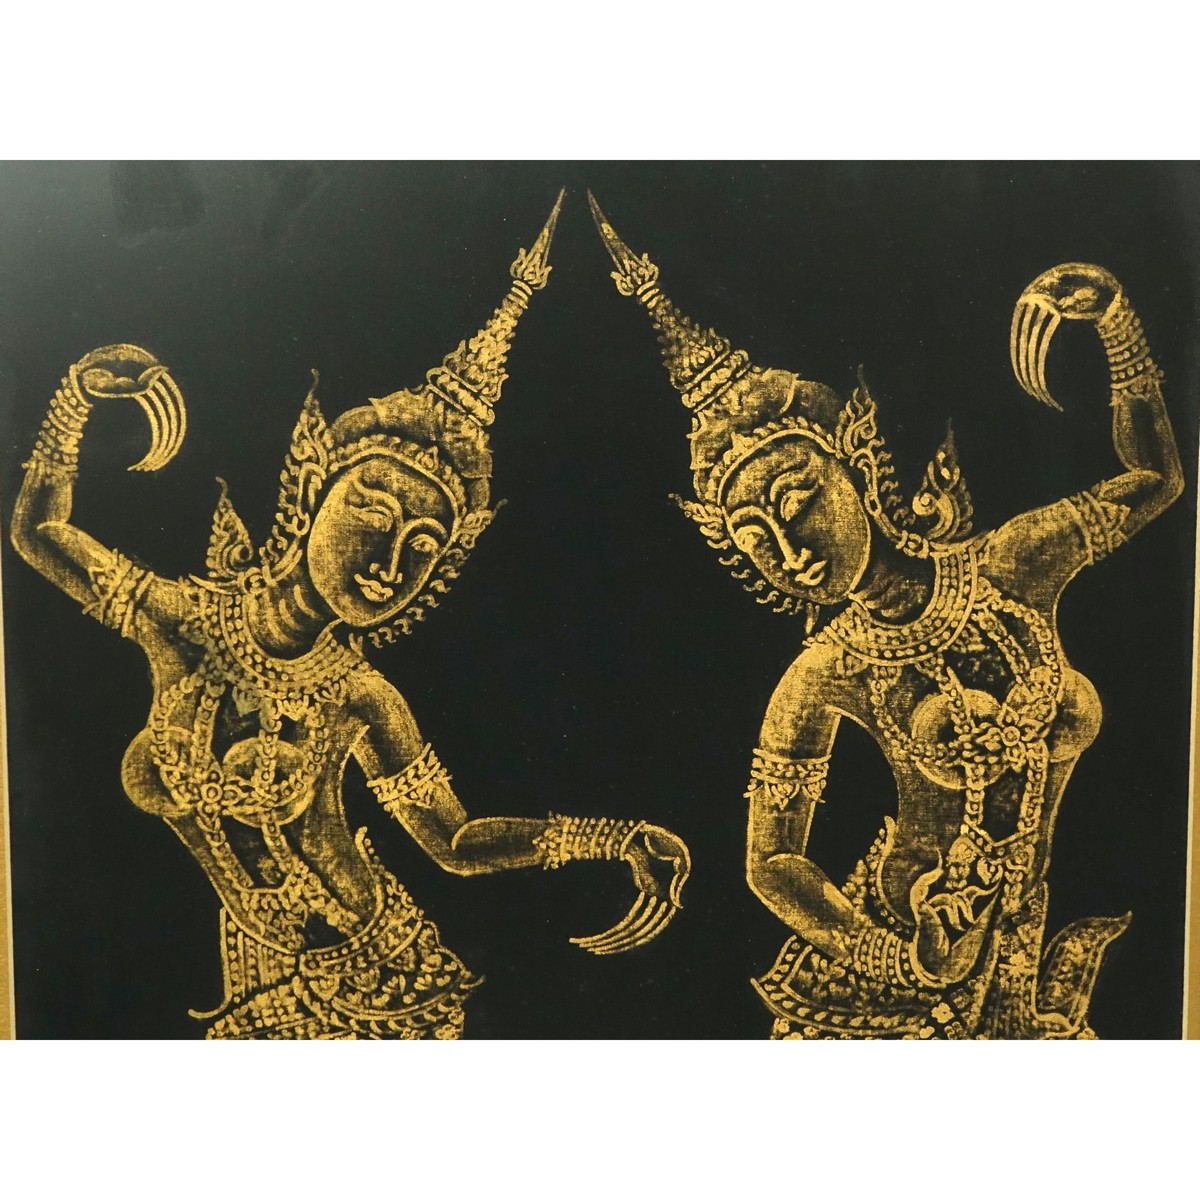 S. Bhaudhularp (20th C) Acrylic on Fabric, Thai Dancers, Signed and Inscribed Bangkok Thailand Lower Right.